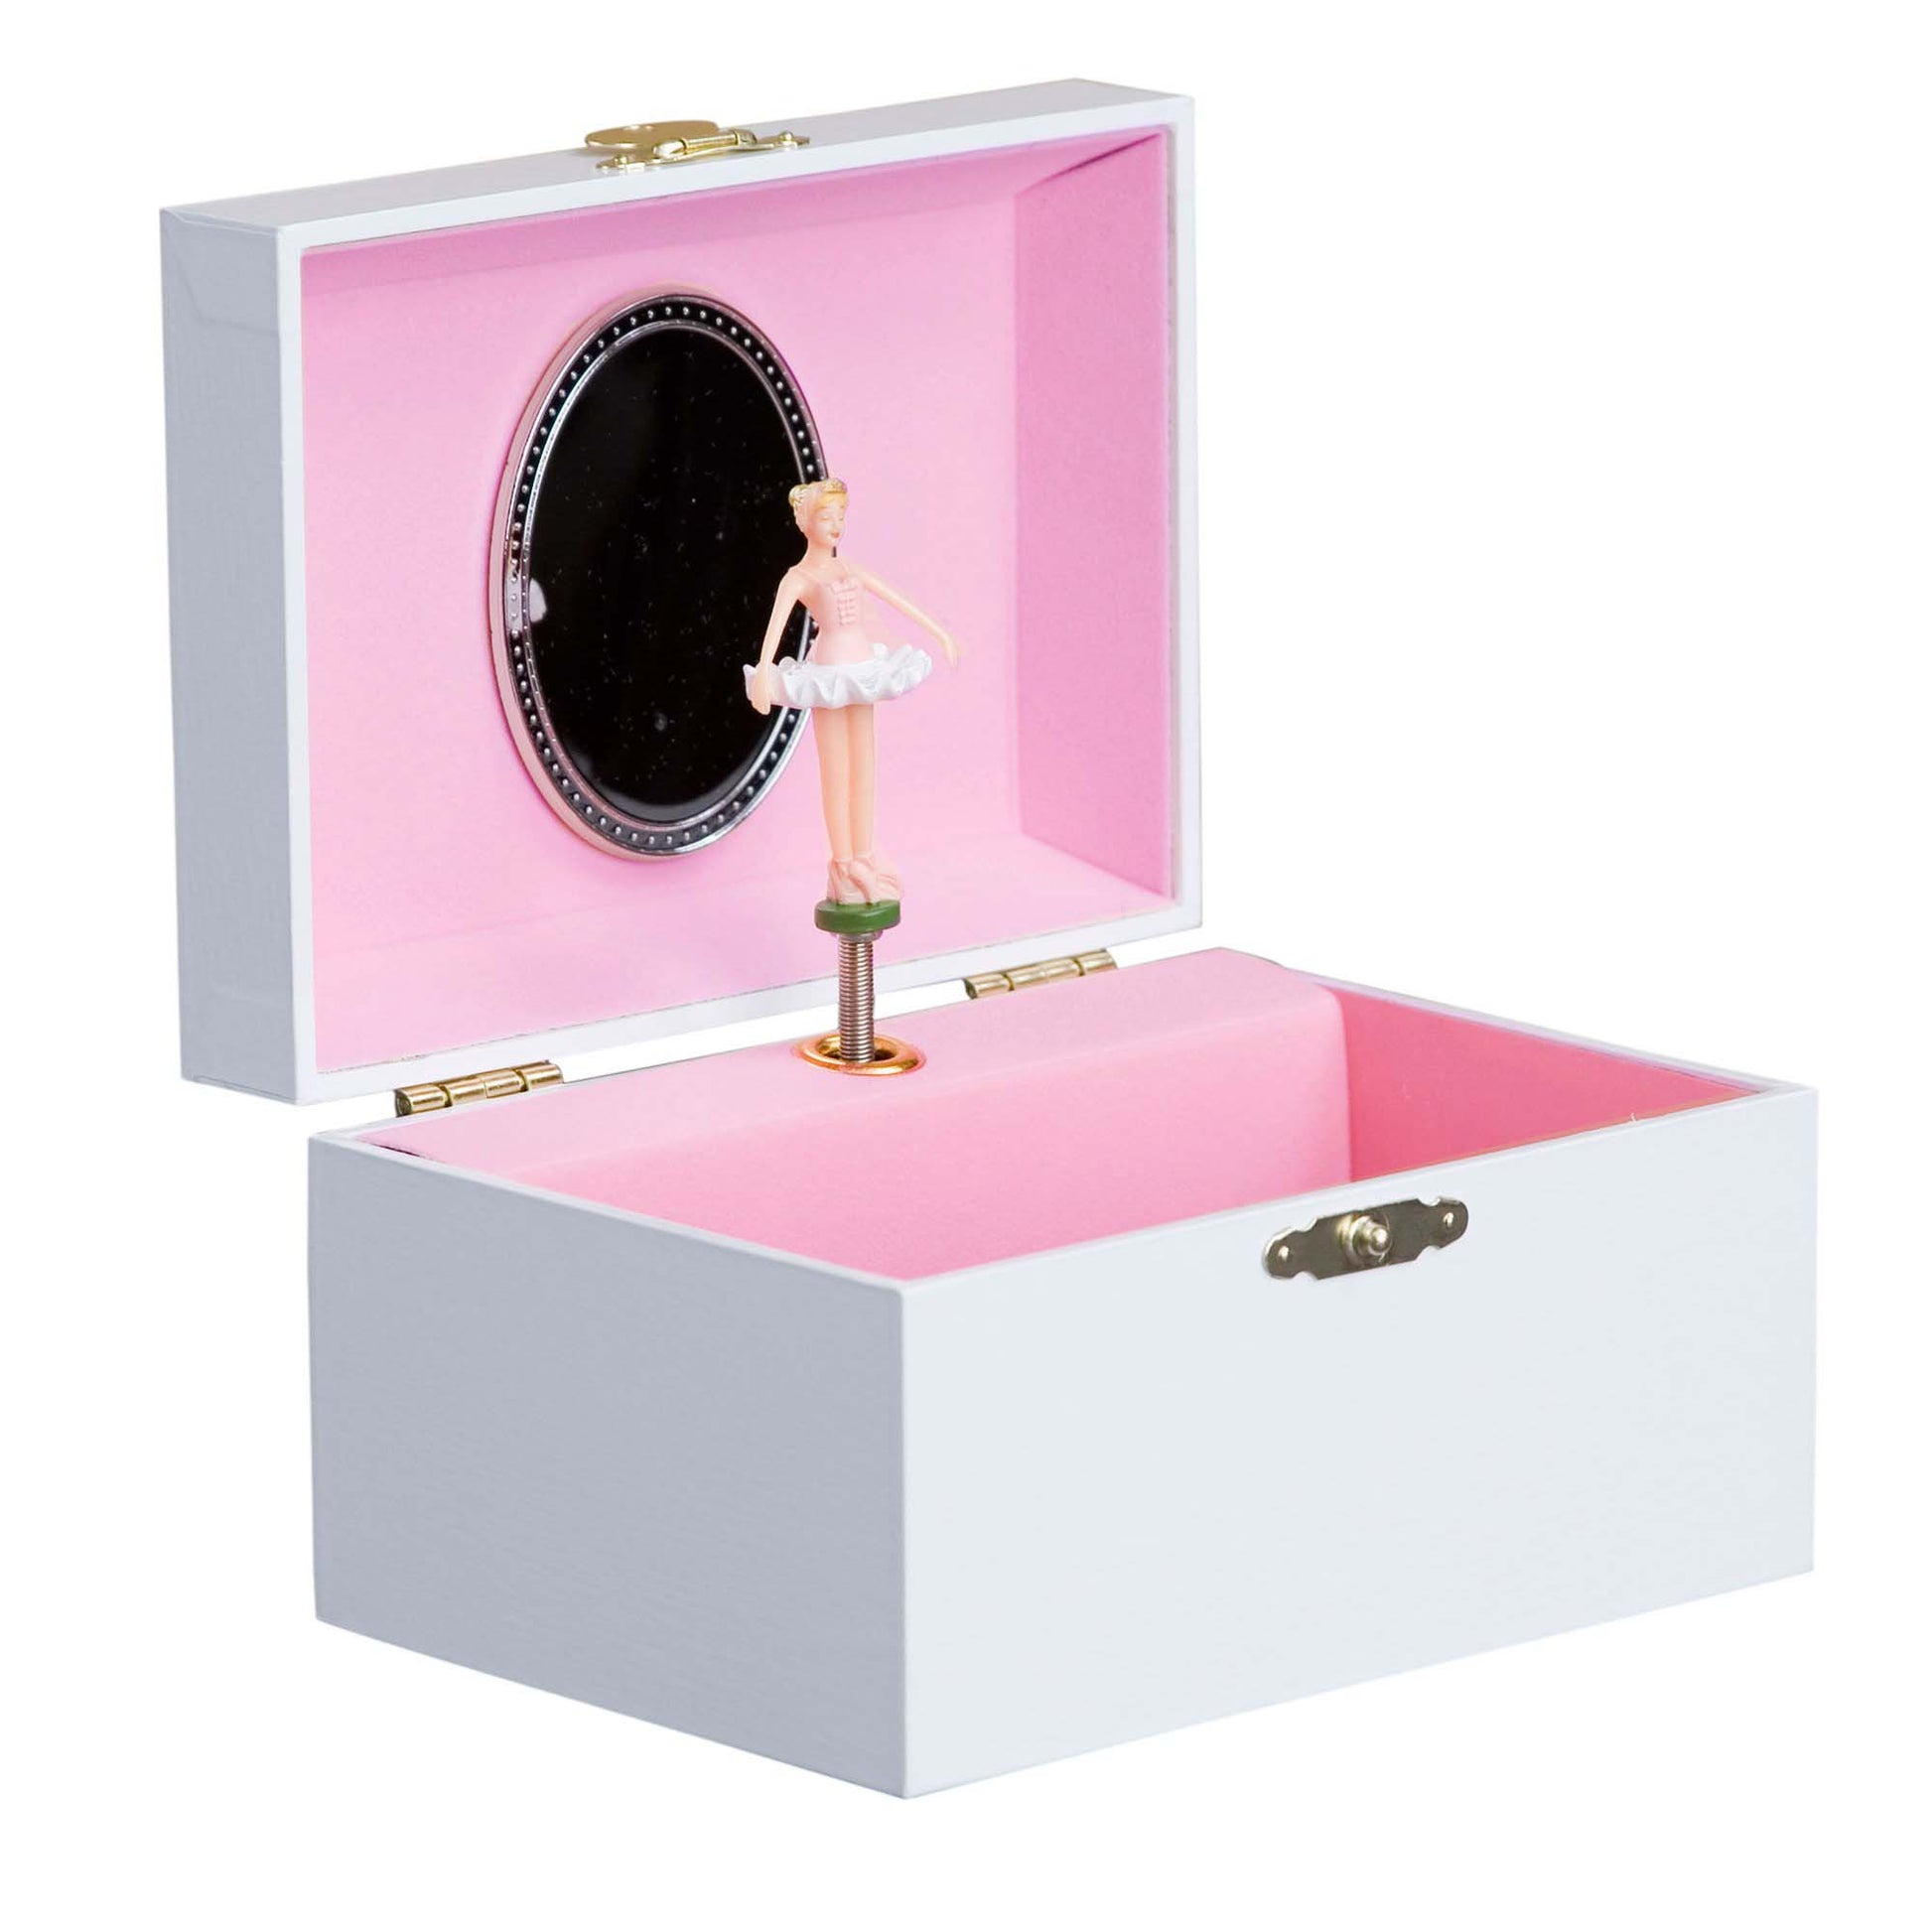 Personalized Ballerina Jewelry Box with Ballet Princess design